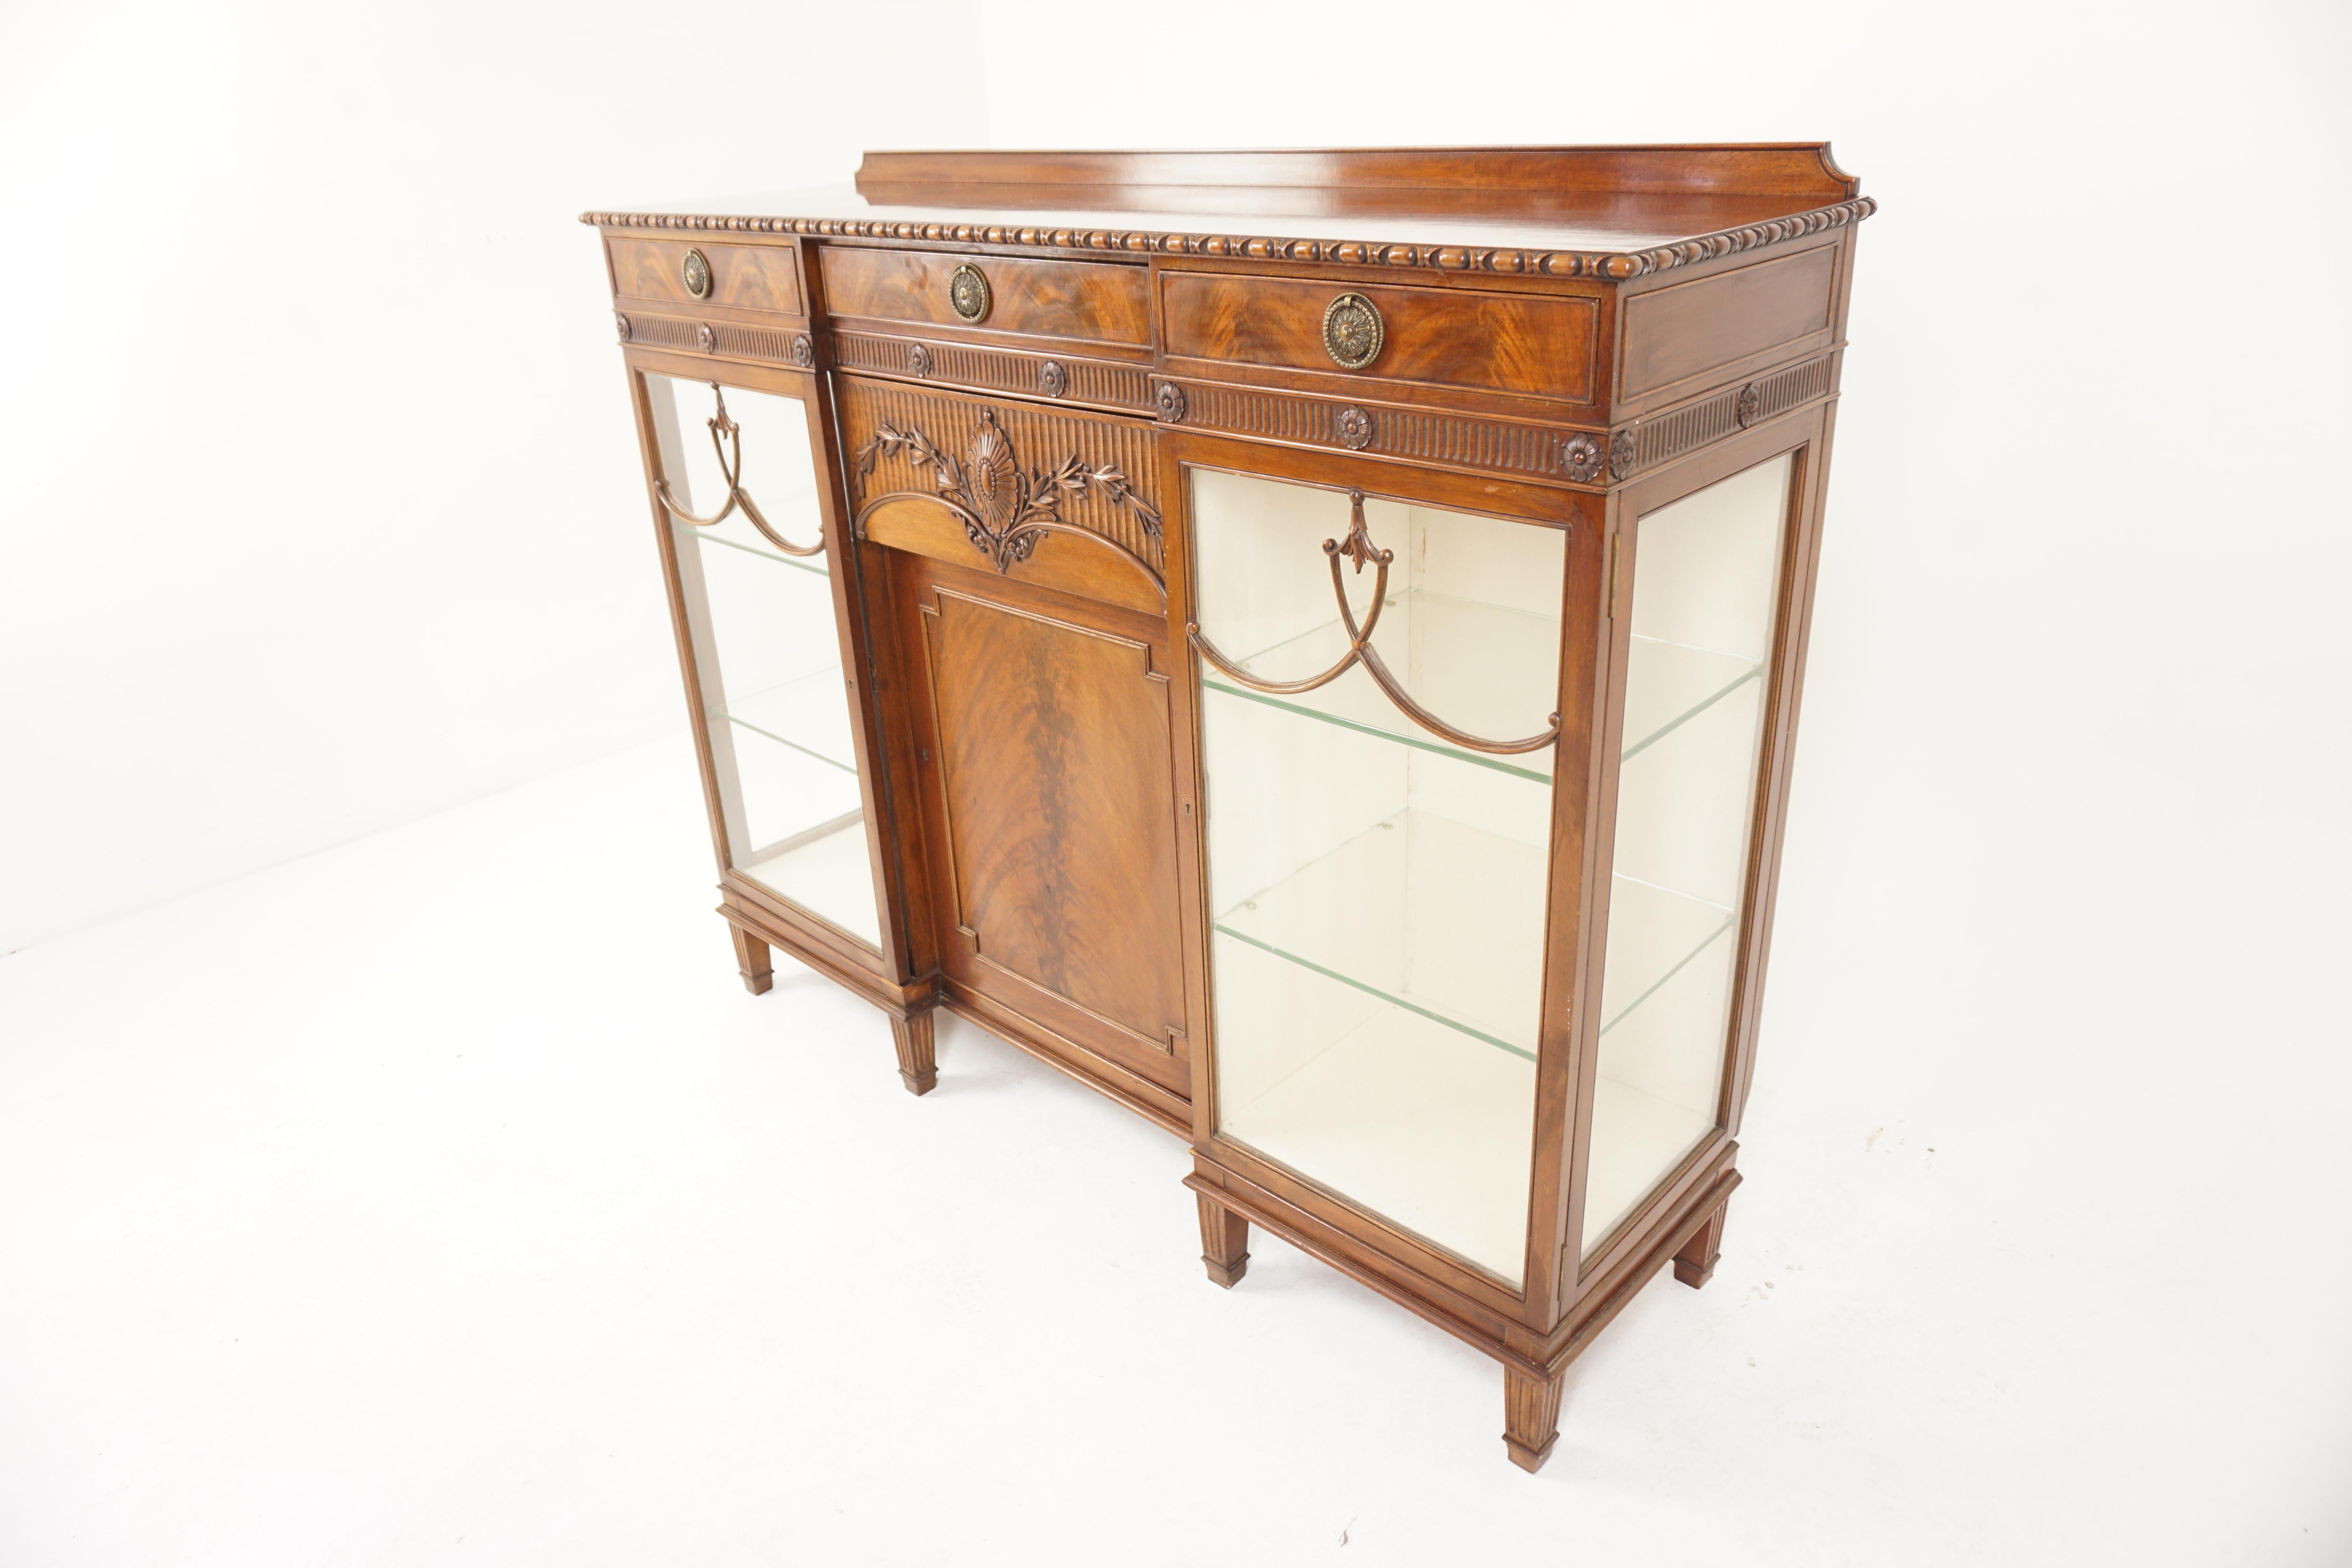 Carved Walnut Display Cabinet, China Cabinet, Scotland 1900, H877

$1850
Scotland 1900
Solid Walnut
Original Finish

Rectangular moulded top
Small shaped pediment on back
3 drawers underneath
Shaped central drawer
Underneath a covered panelled door,